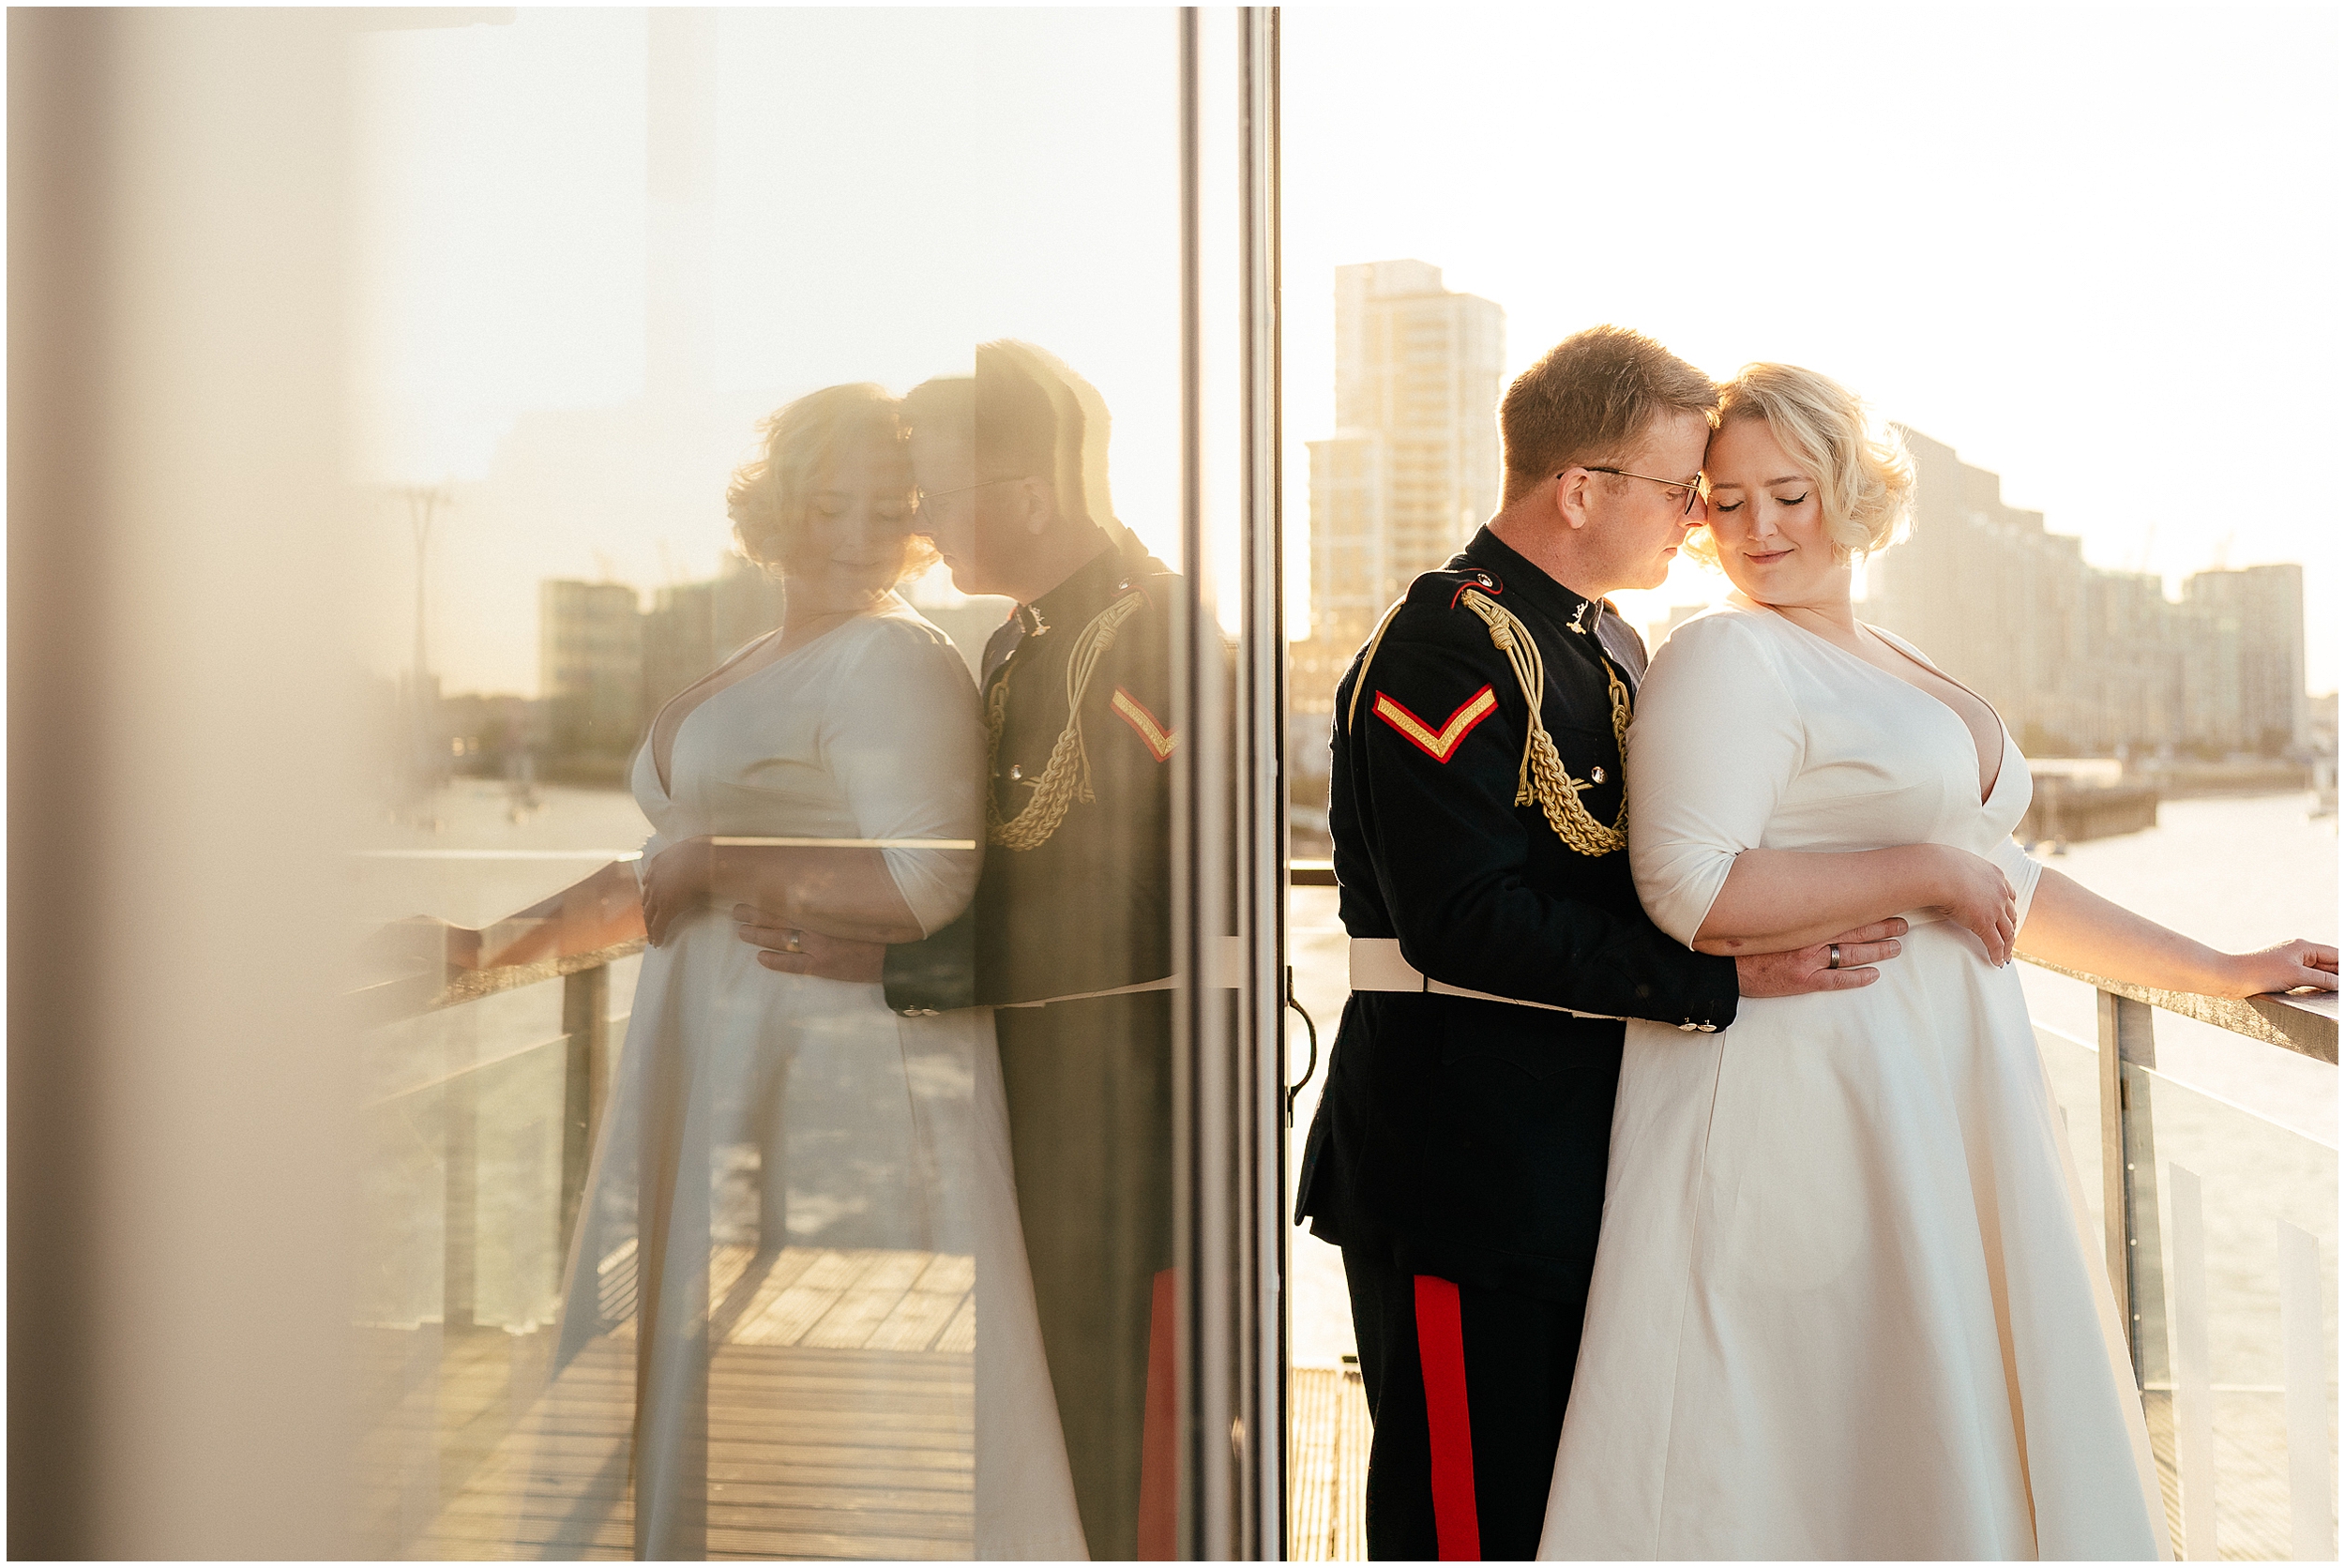 A bride and groom at the Greenwich Yacht Club in London.